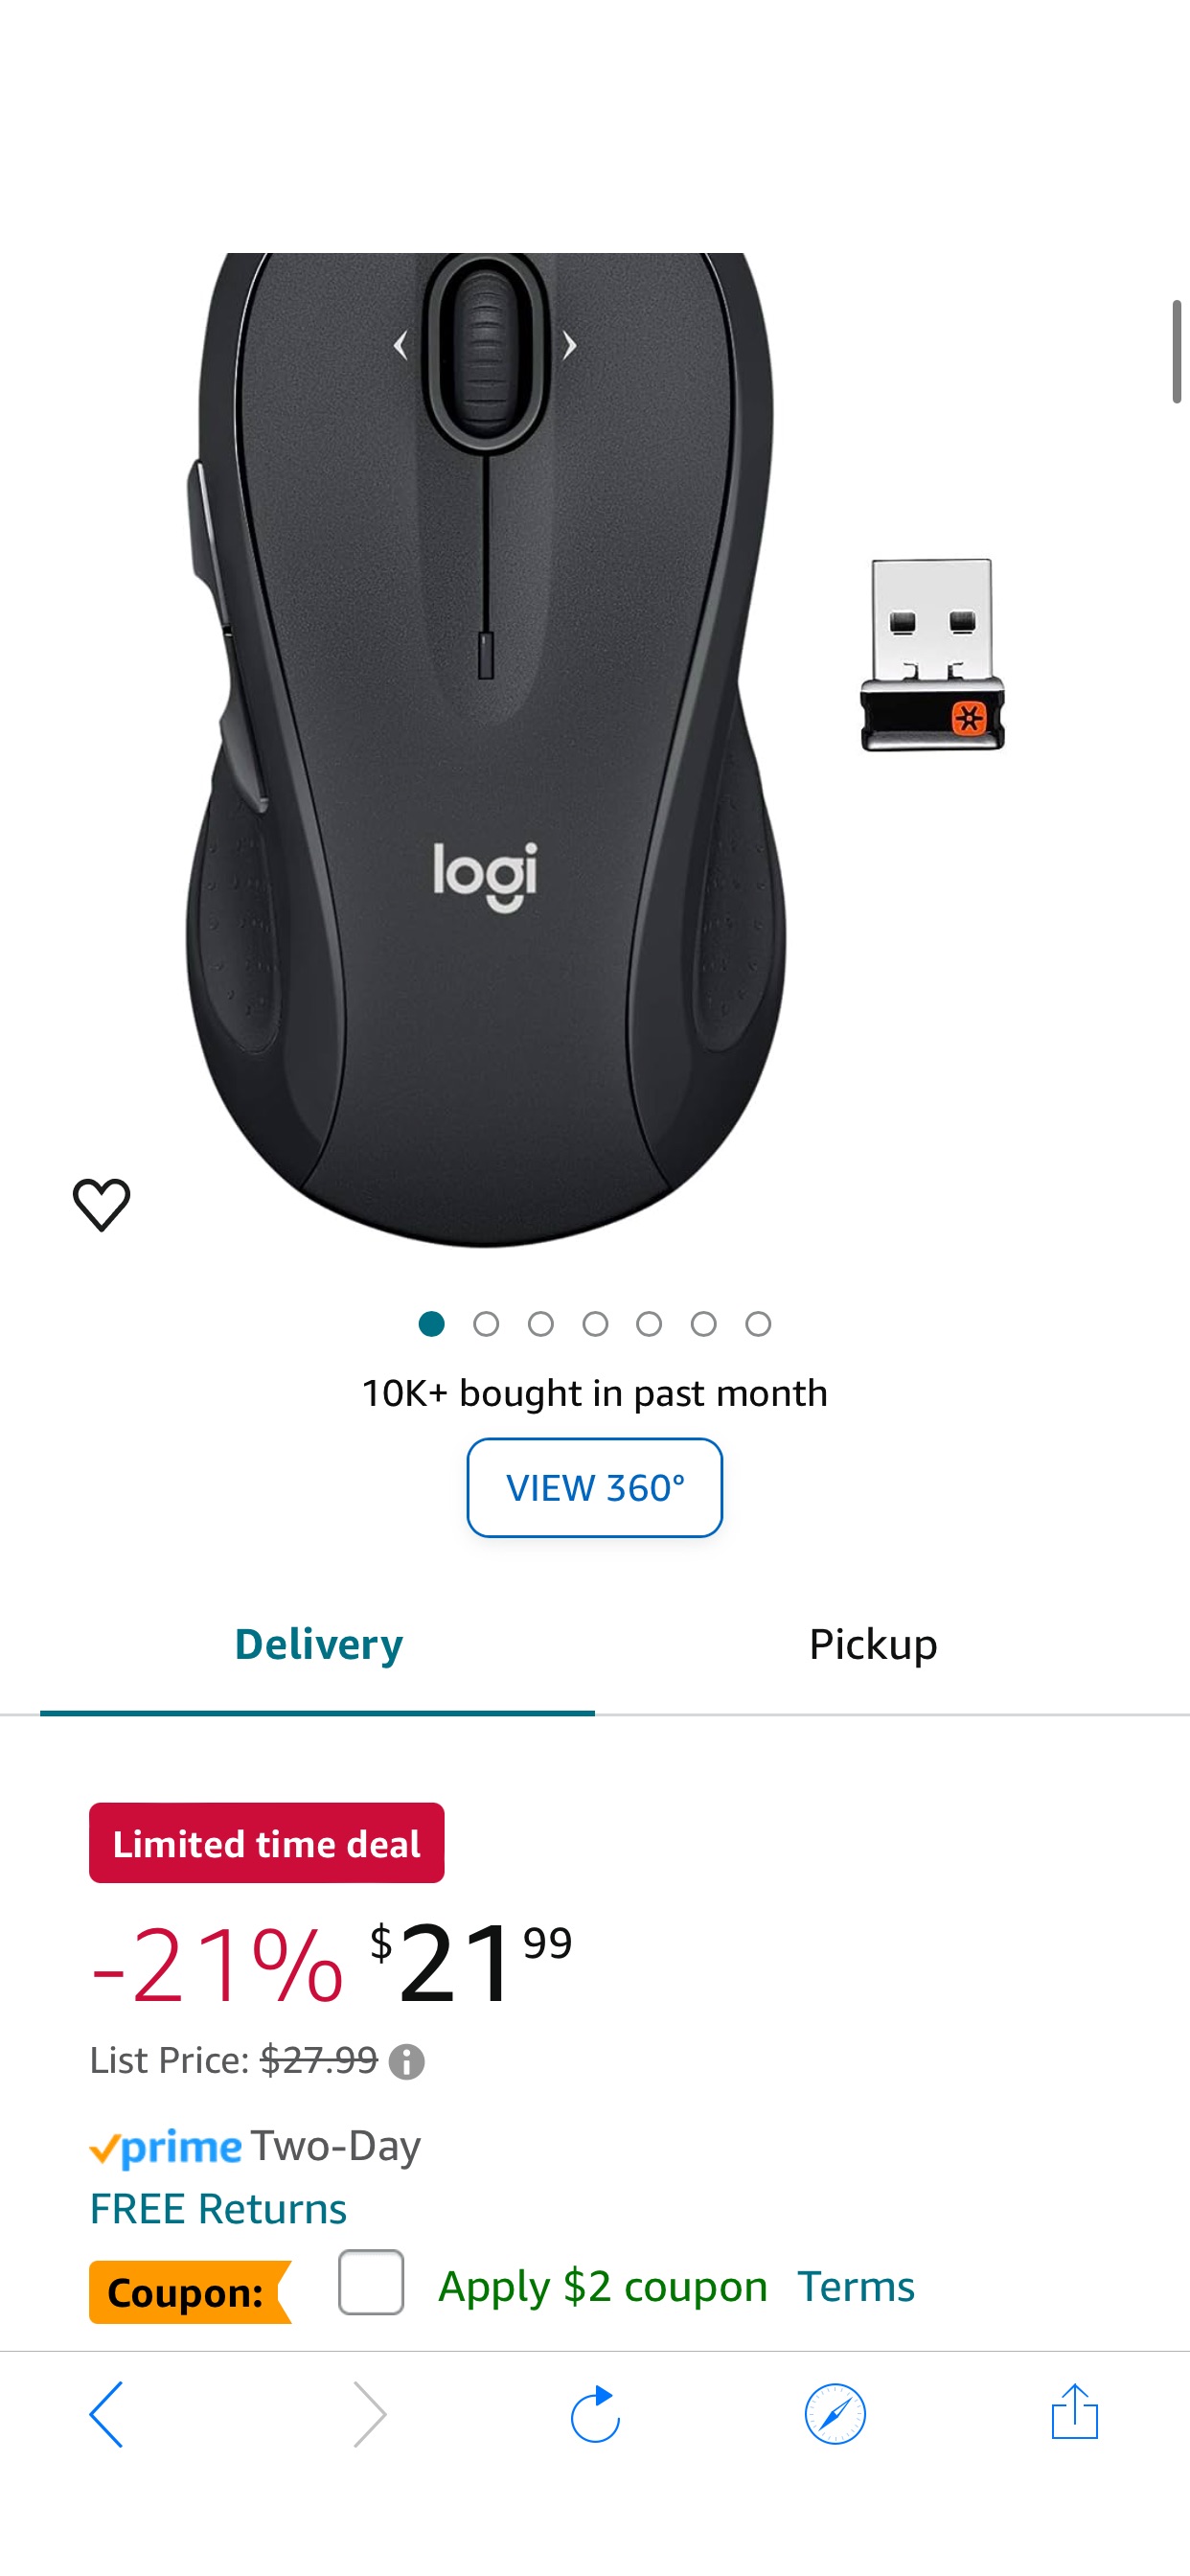 Amazon.com: Logitech M510 Wireless Computer Mouse for PC with USB Unifying Receiver - Graphite : Electronics 无线鼠标